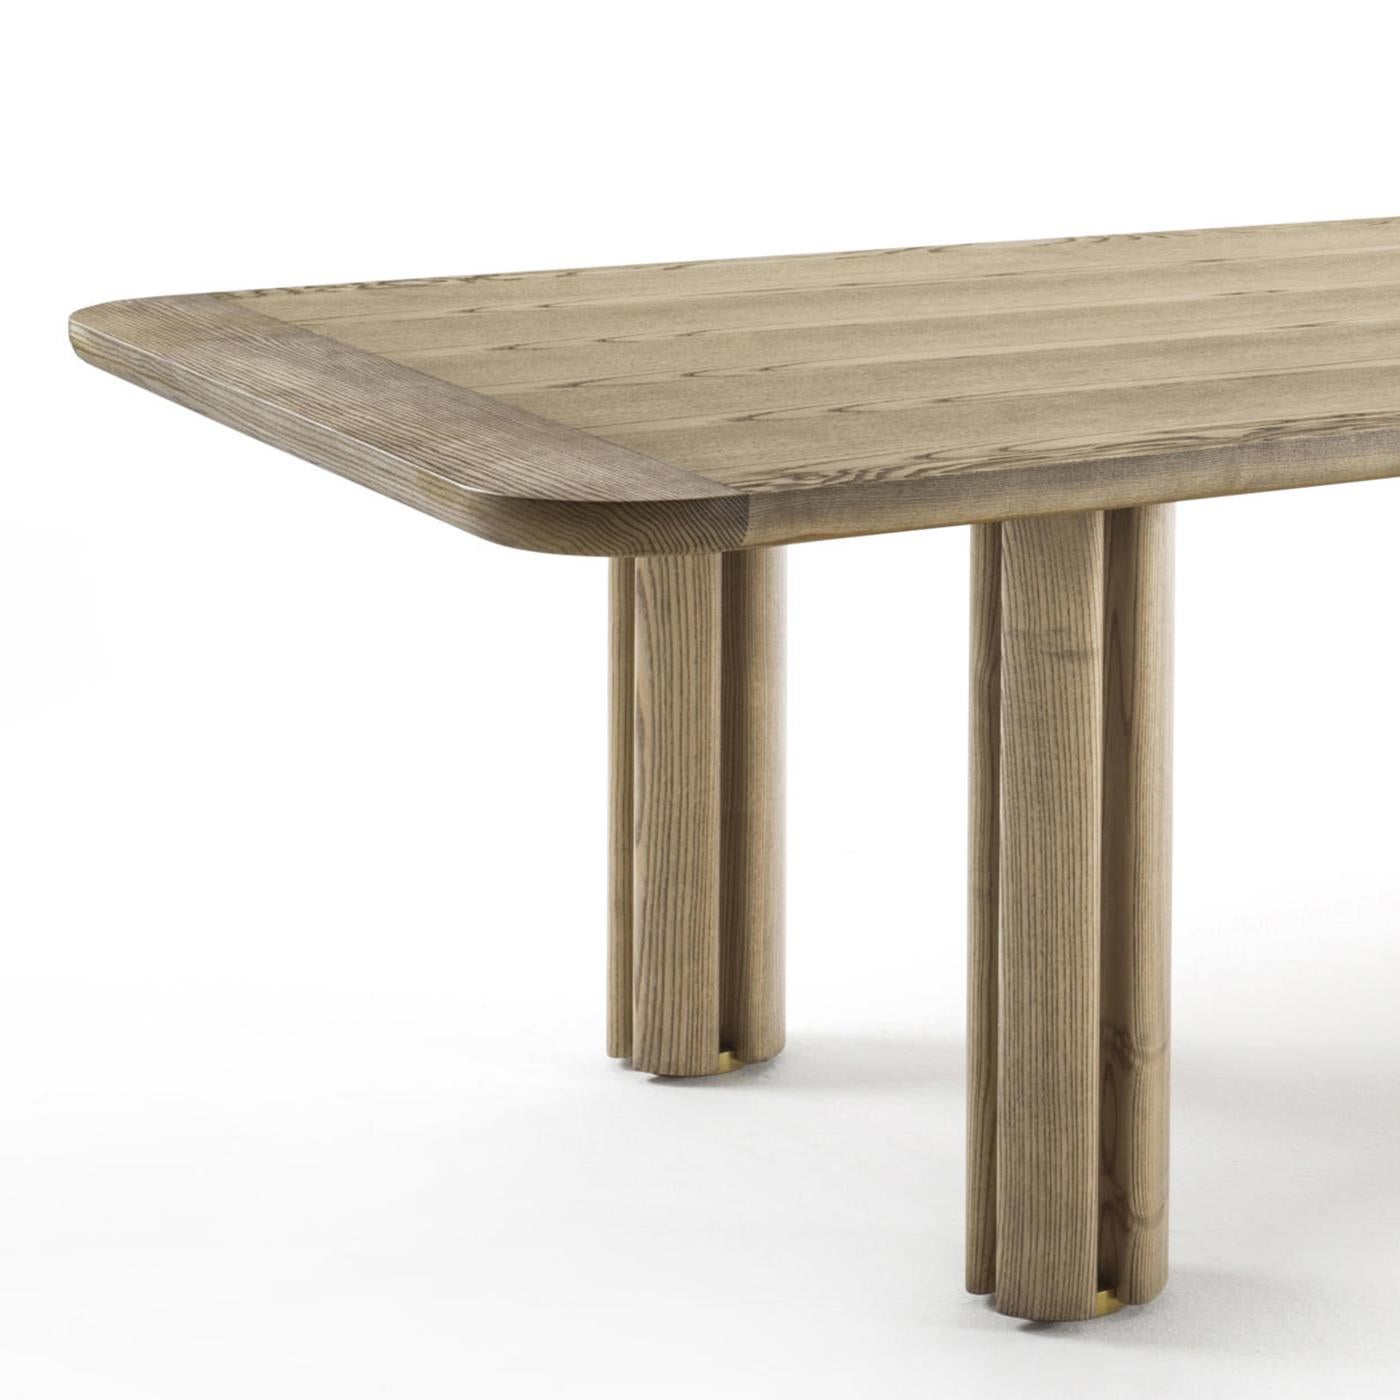 Dining table Mathilda all in solid ash wood
in matte finish. With 4 recessed legs in solid 
ash and top frame in solid ash. With solid 
brass feet in brushed finish.
Available in:
L230 x D115 x H75cm, price: 11900,00€.
L260 x D115 x H75cm,